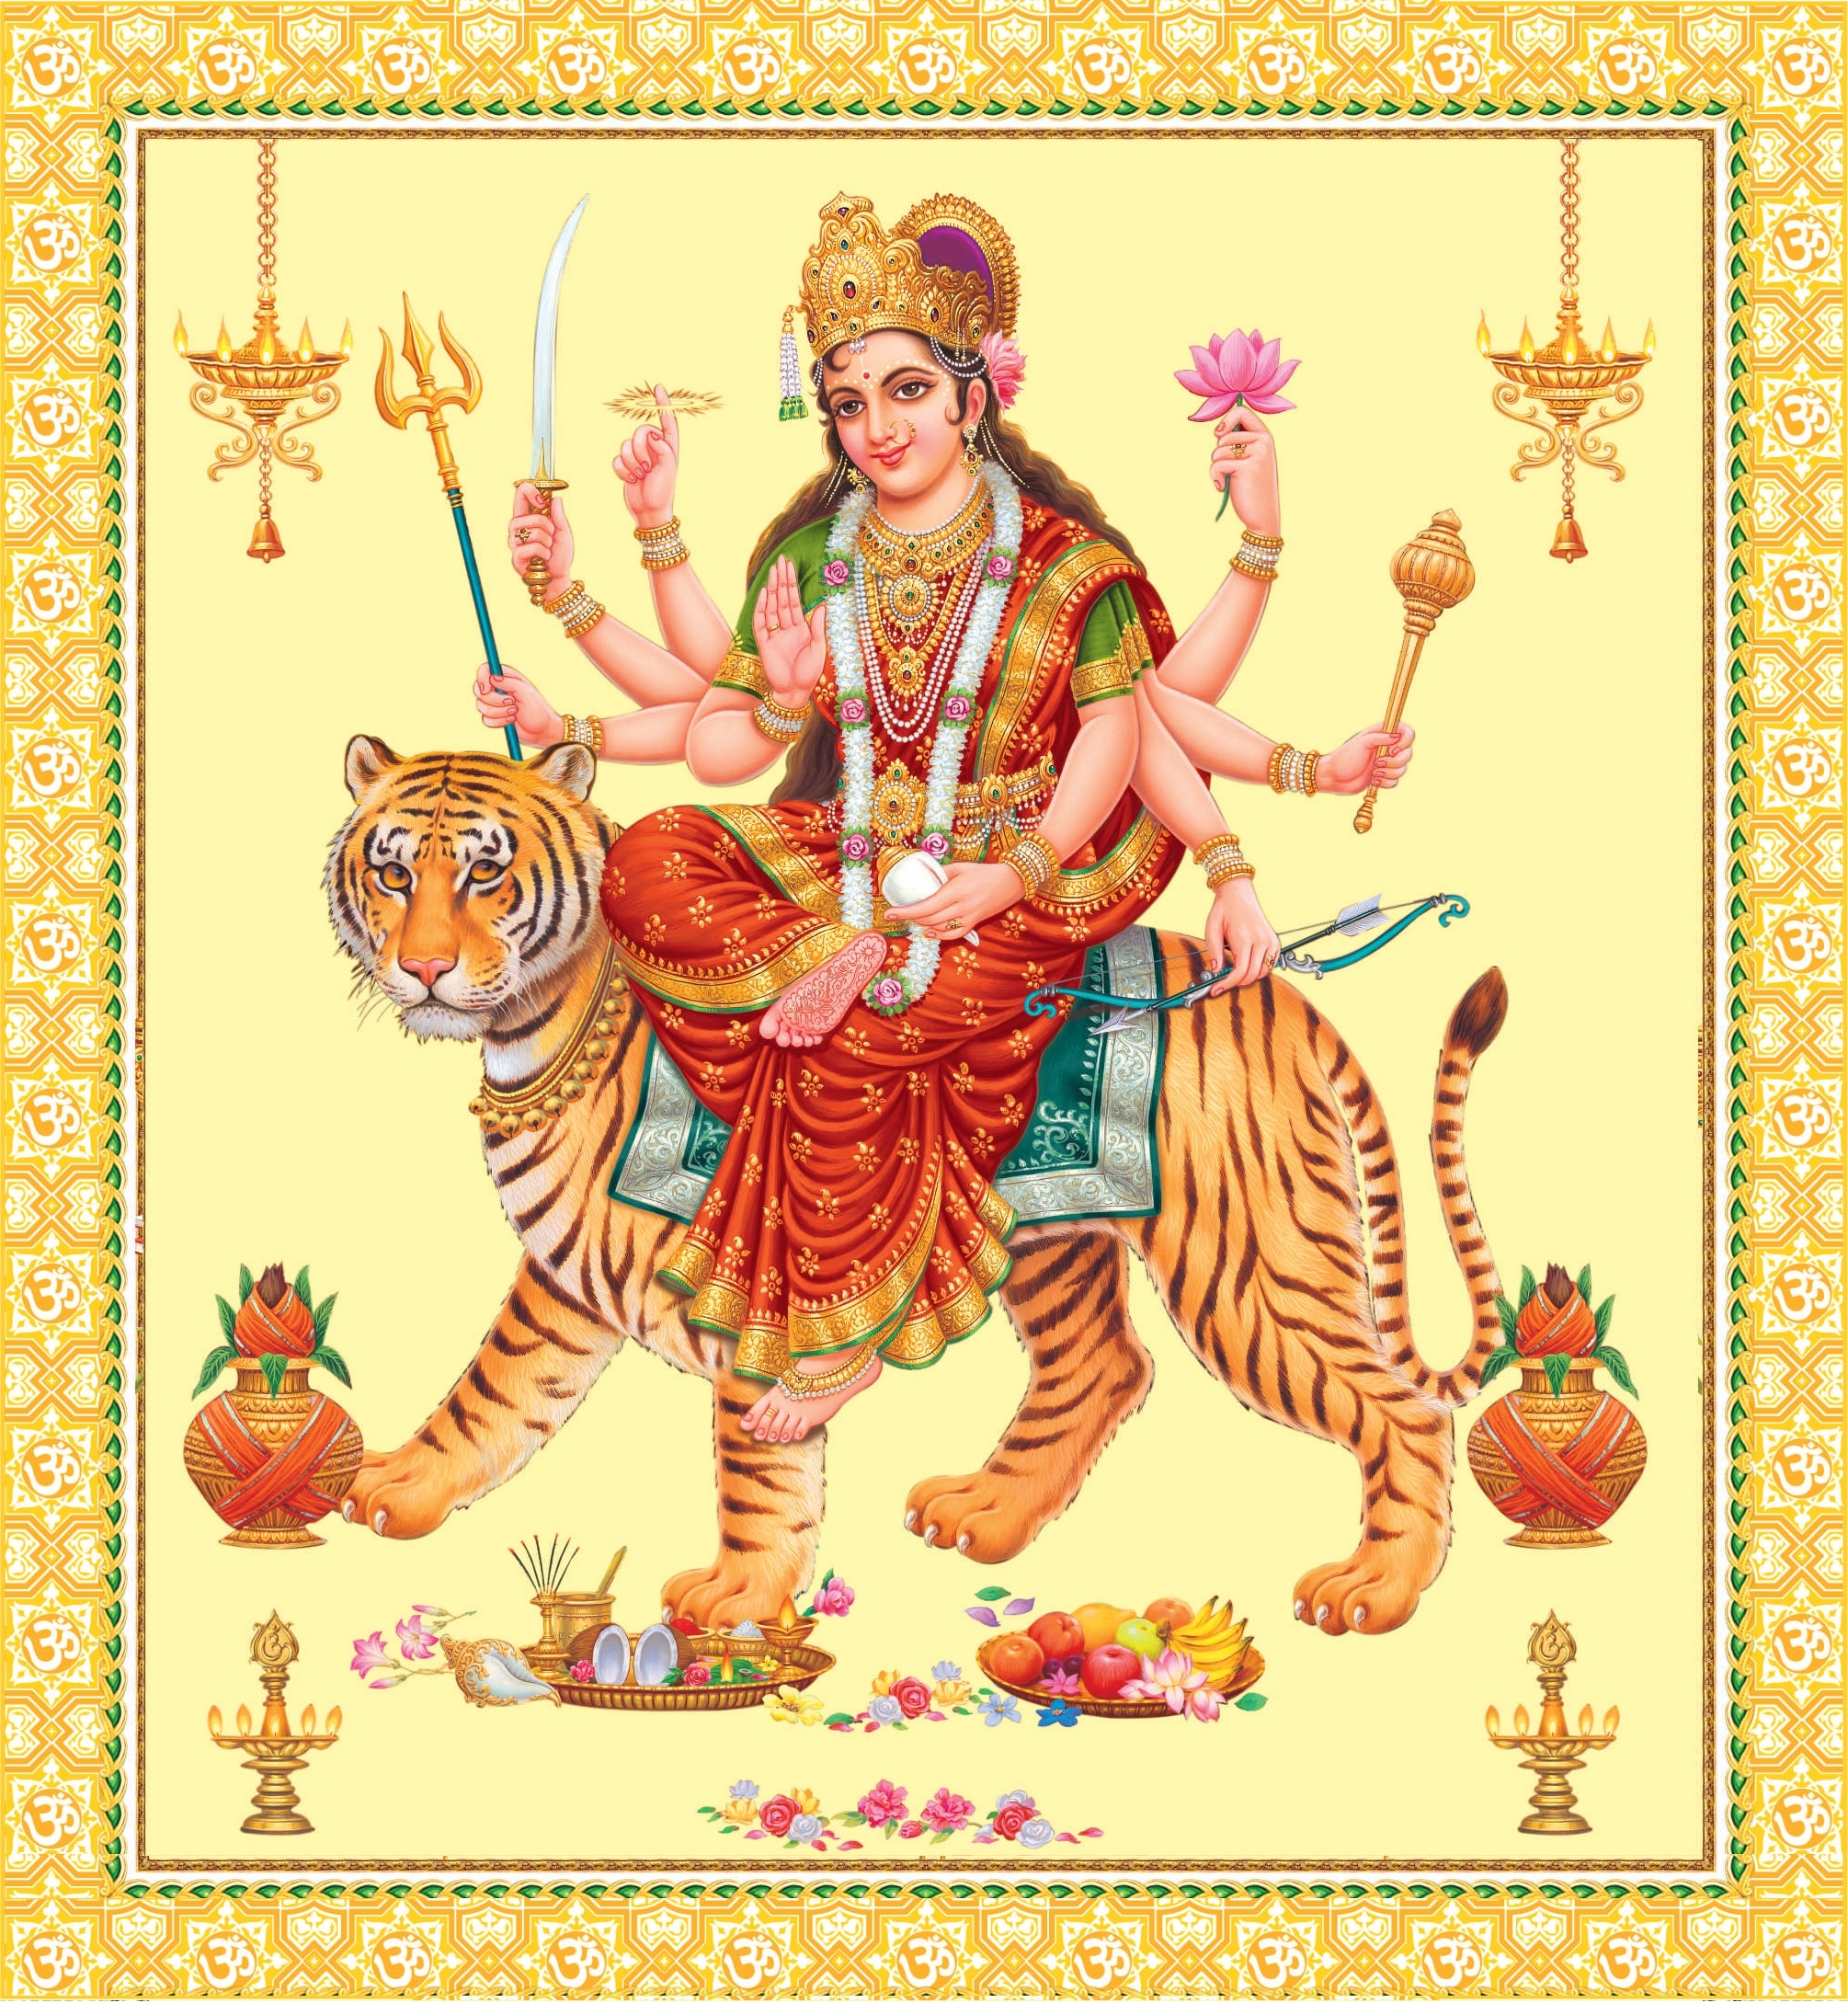 Happy Navratri 2021 Wishes Images Download, HD Wallpapers, Quotes, Photos,  Messages, GIF Pics, Pictures, Shayari, SMS, Status for Whatsapp and  Facebook in Hindi - Happy Navratri 2021 Wishes Images, Wallpapers, Photos:  'हमको